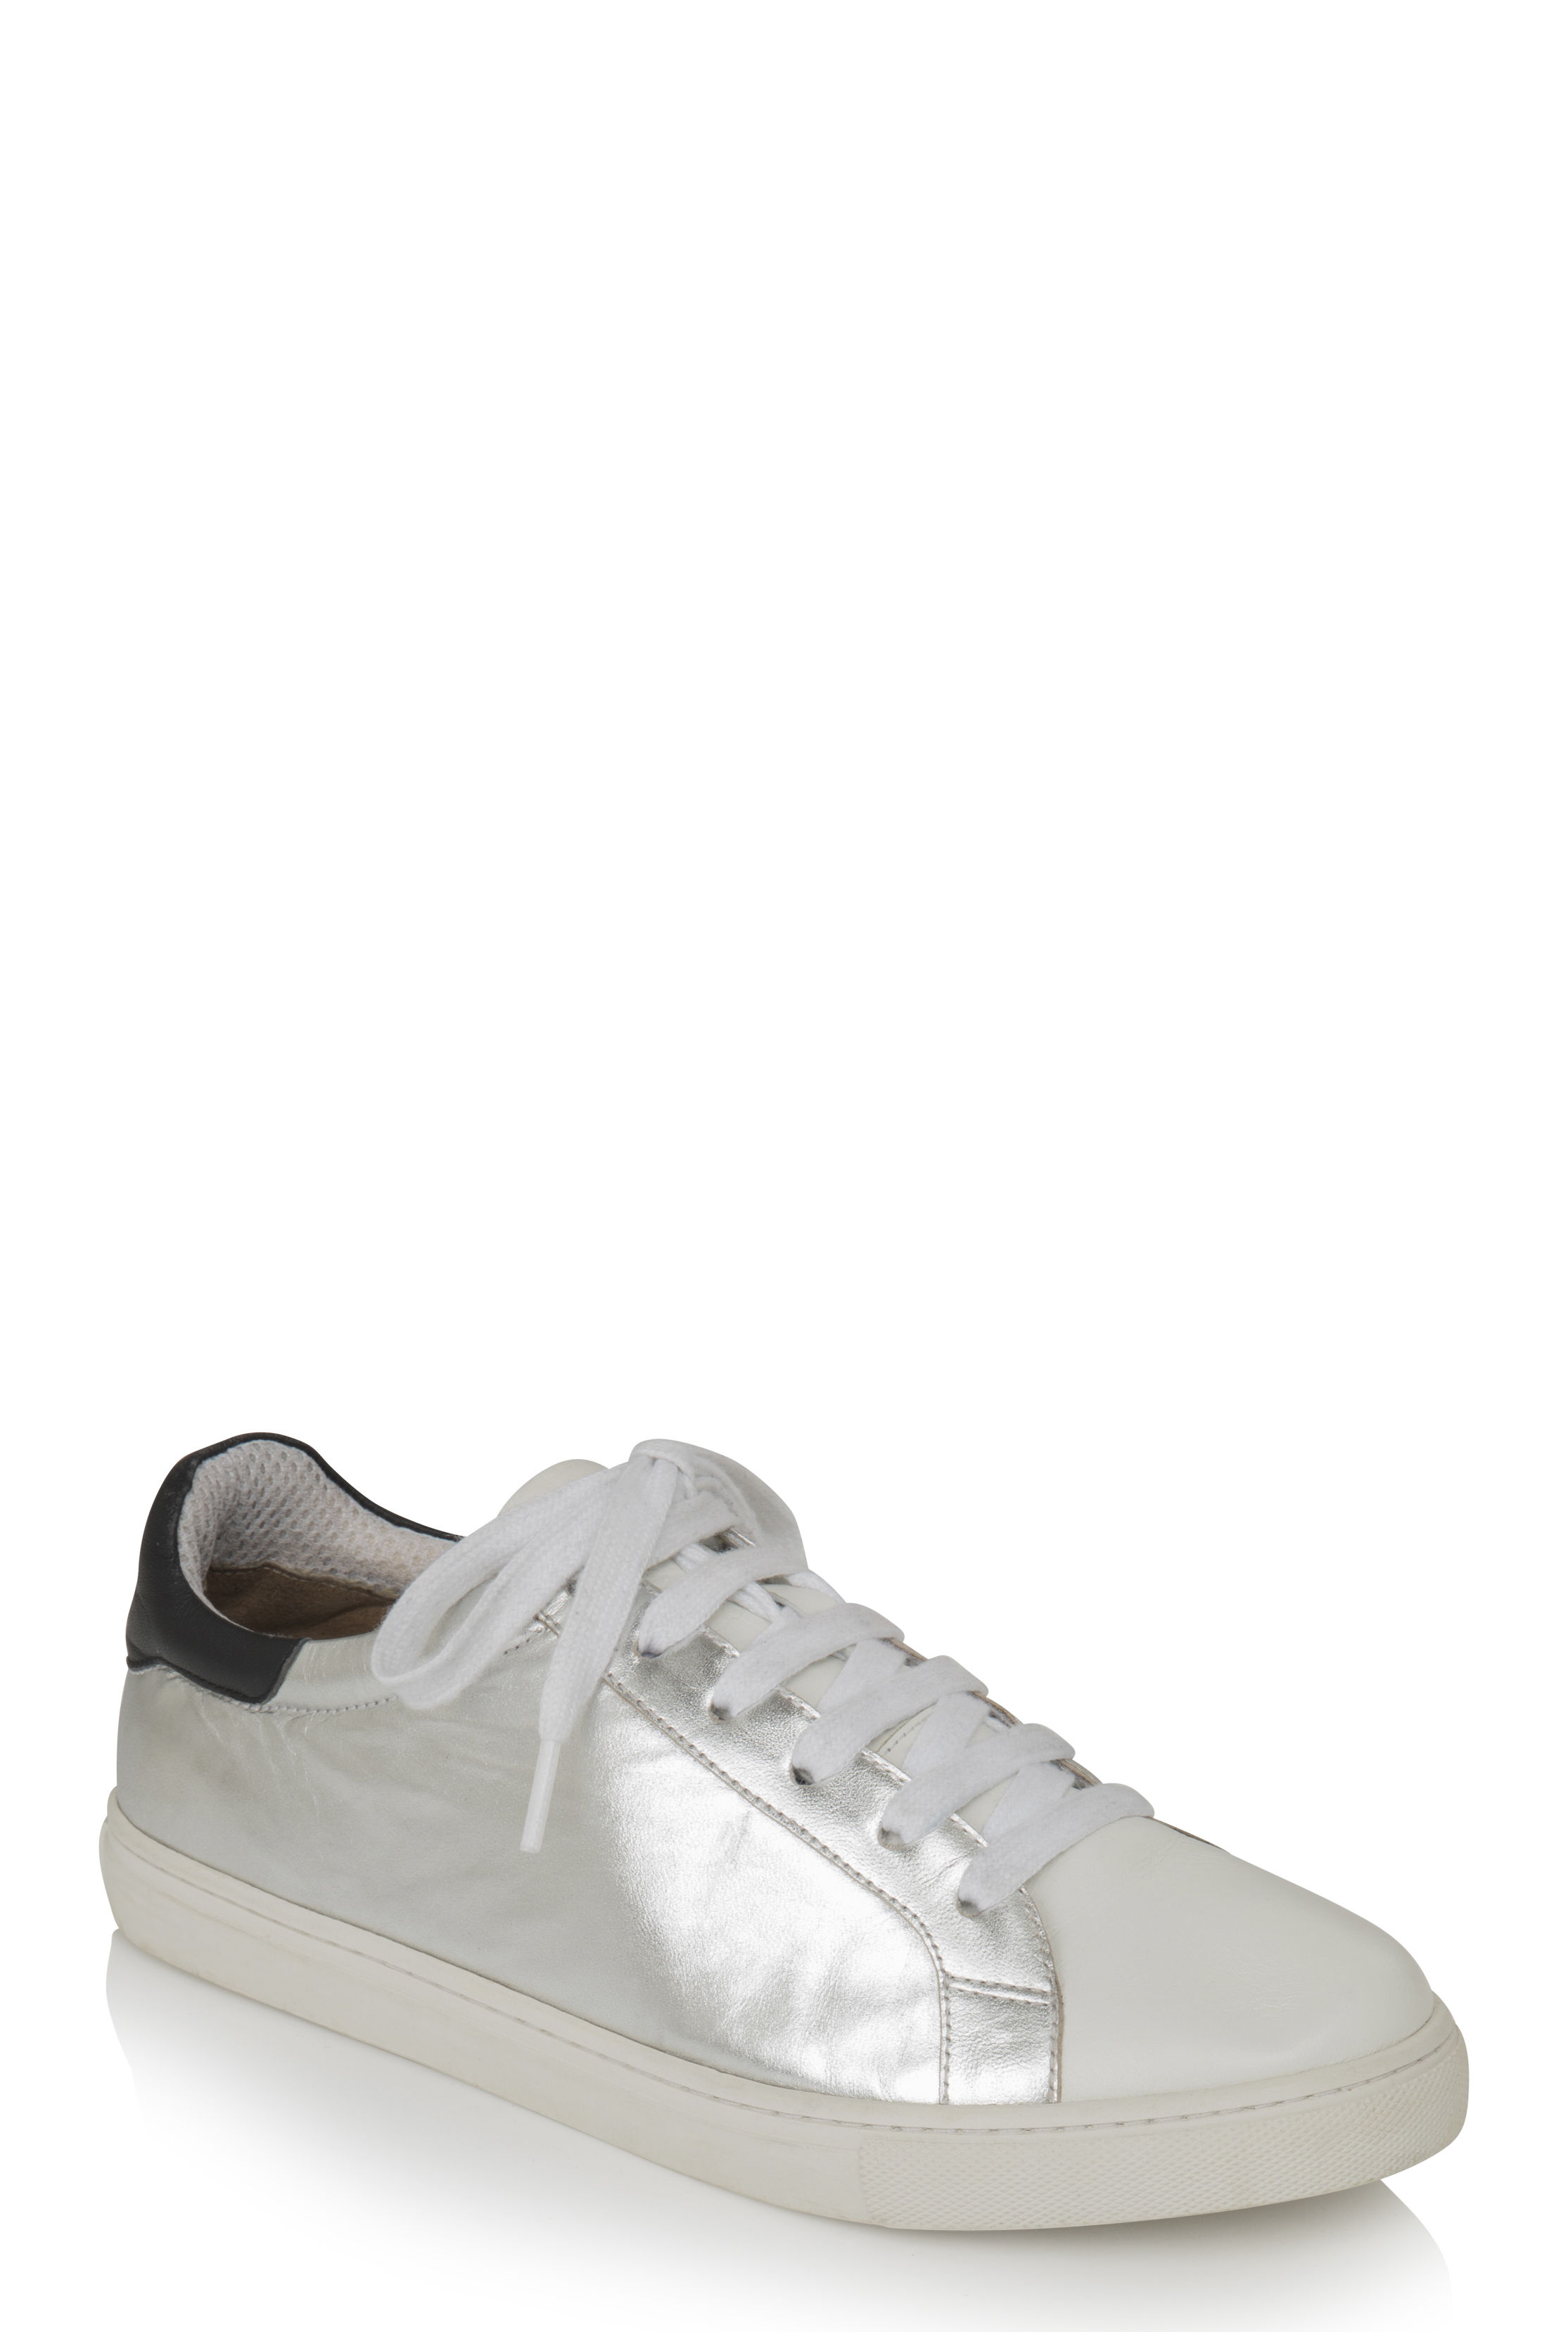 Silver Leather Lace Up Trainers | Long Tall Sally